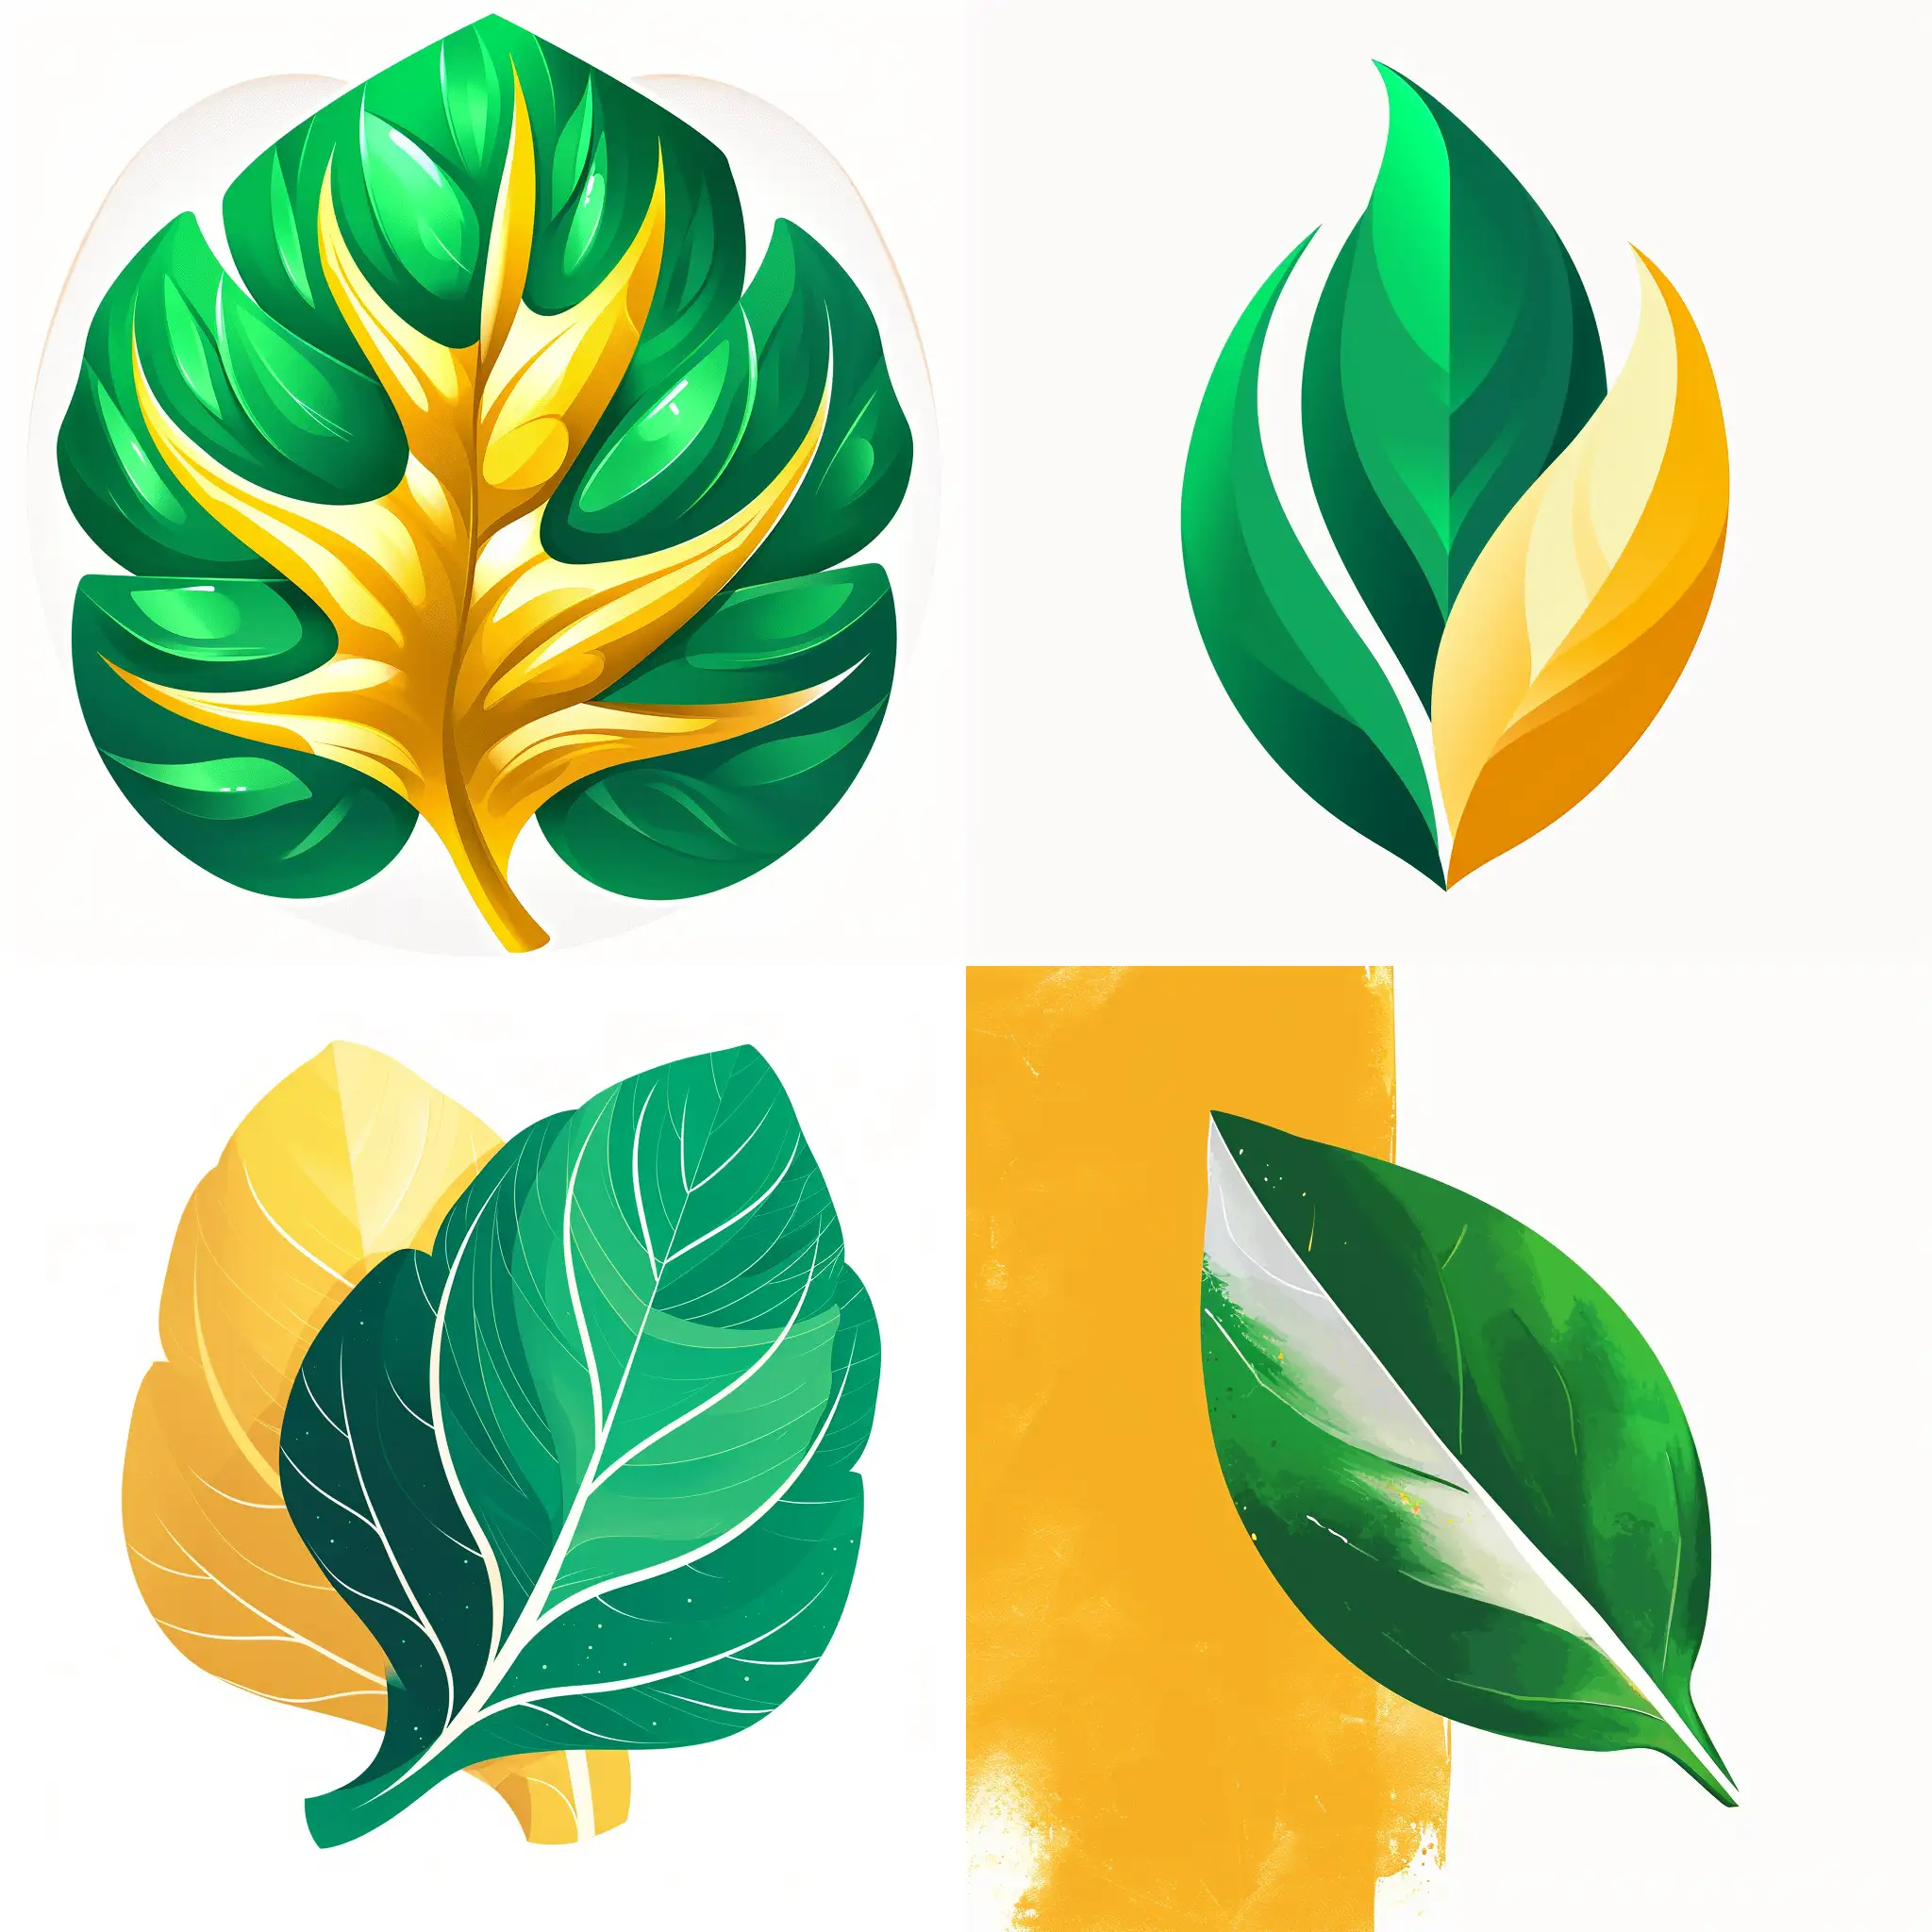 Create an icon using bright emerald green, golden yellow and pearl white as color palette for a microgreens brand using a vibrant and stylized bright emerald green leaf as visual reference.